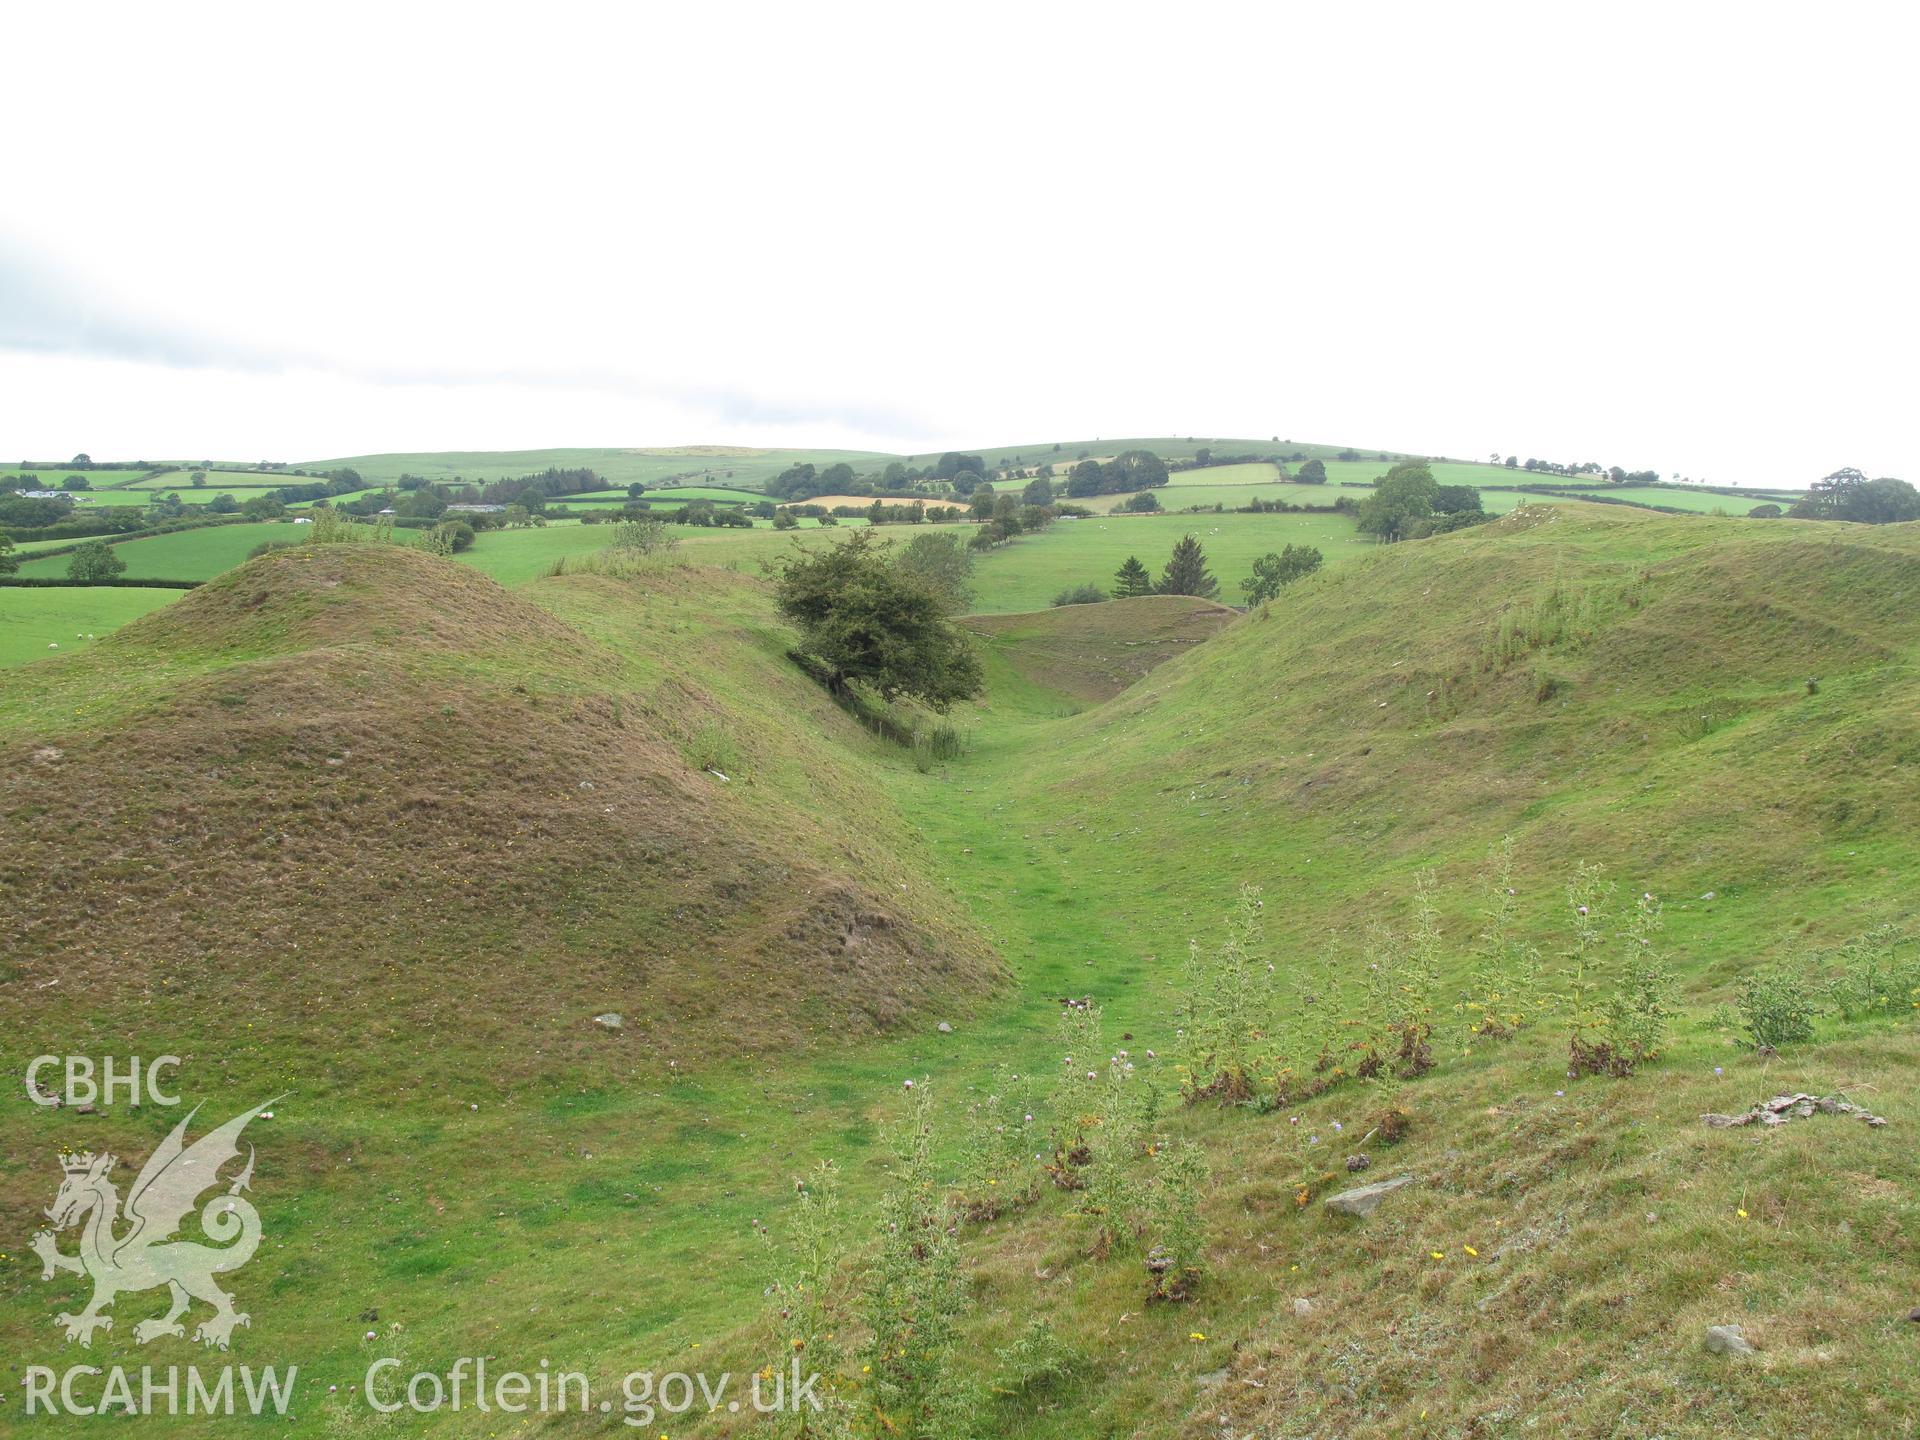 Painscastle west ditch from the south, taken by Brian Malaws on 24 August 2011.